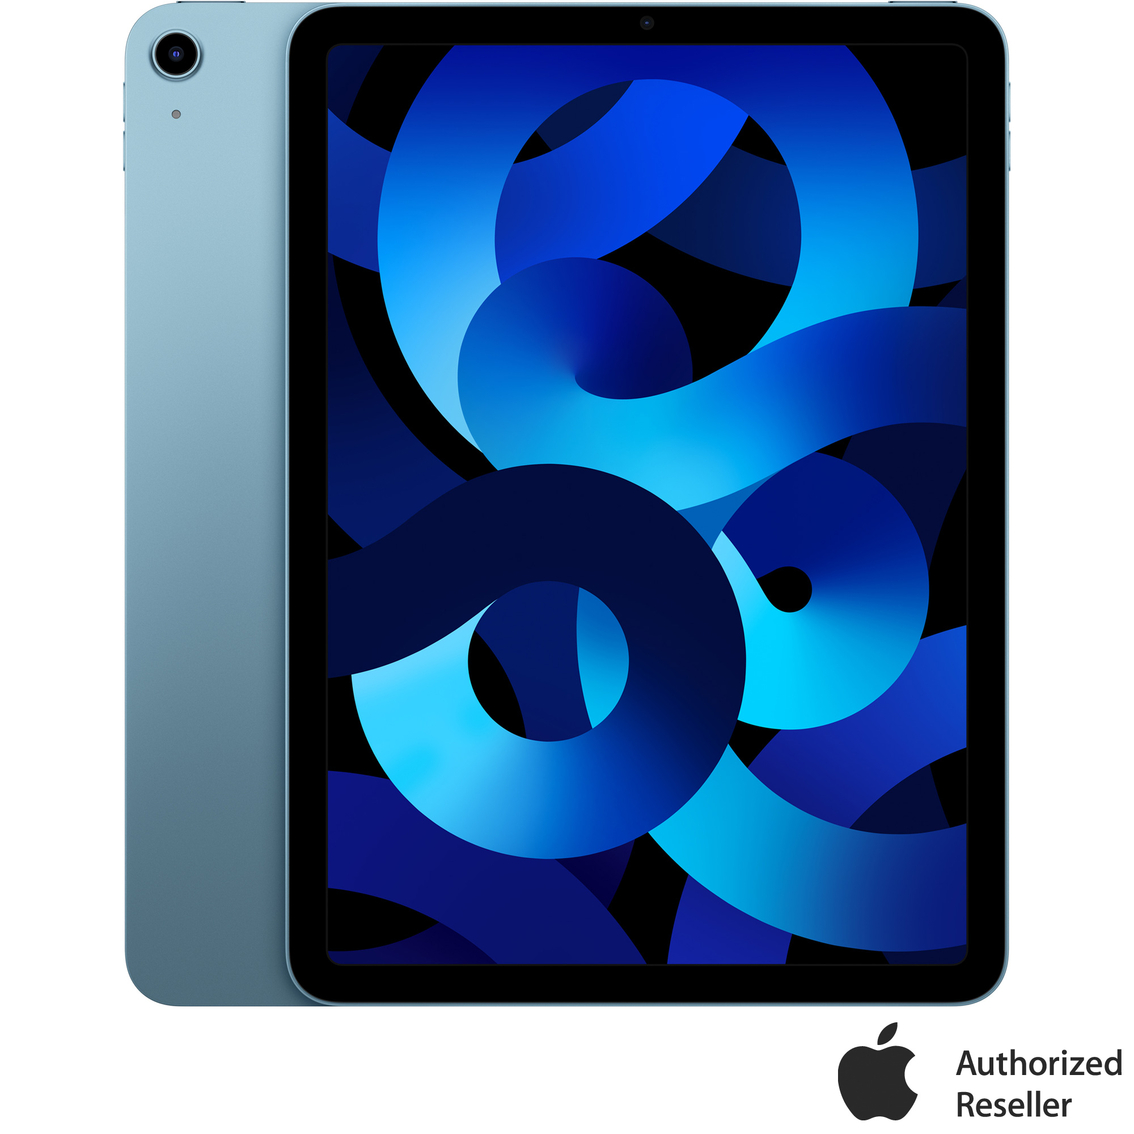 Apple iPad Air 10.9 in. 64GB with Wi-Fi (Latest Model) - Image 1 of 9